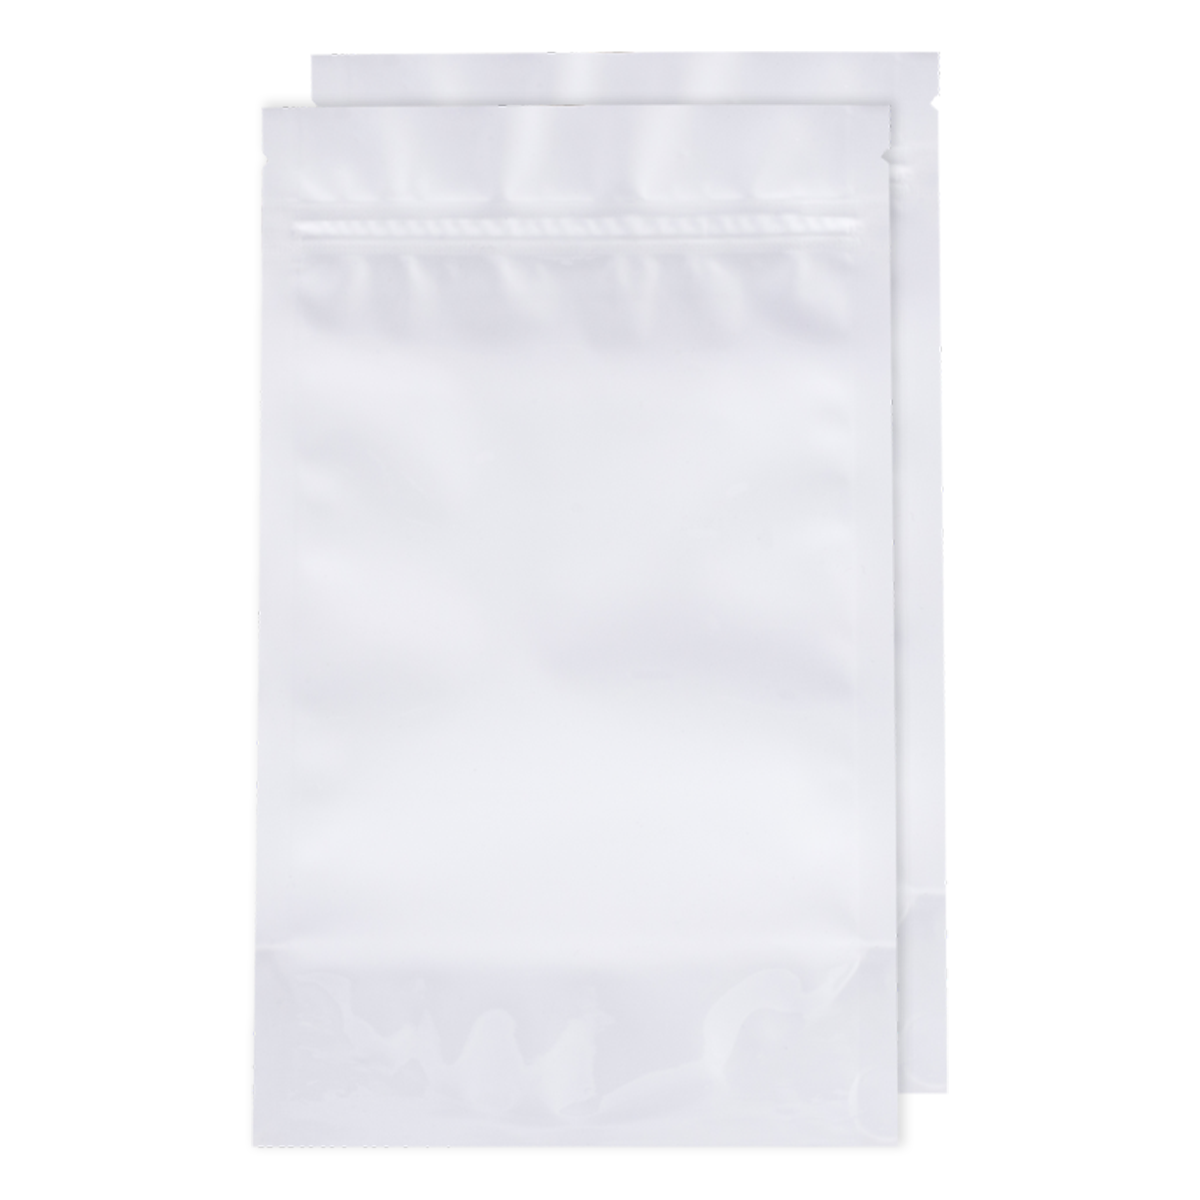 Half Ounce White/White Opaque Barrier Bags